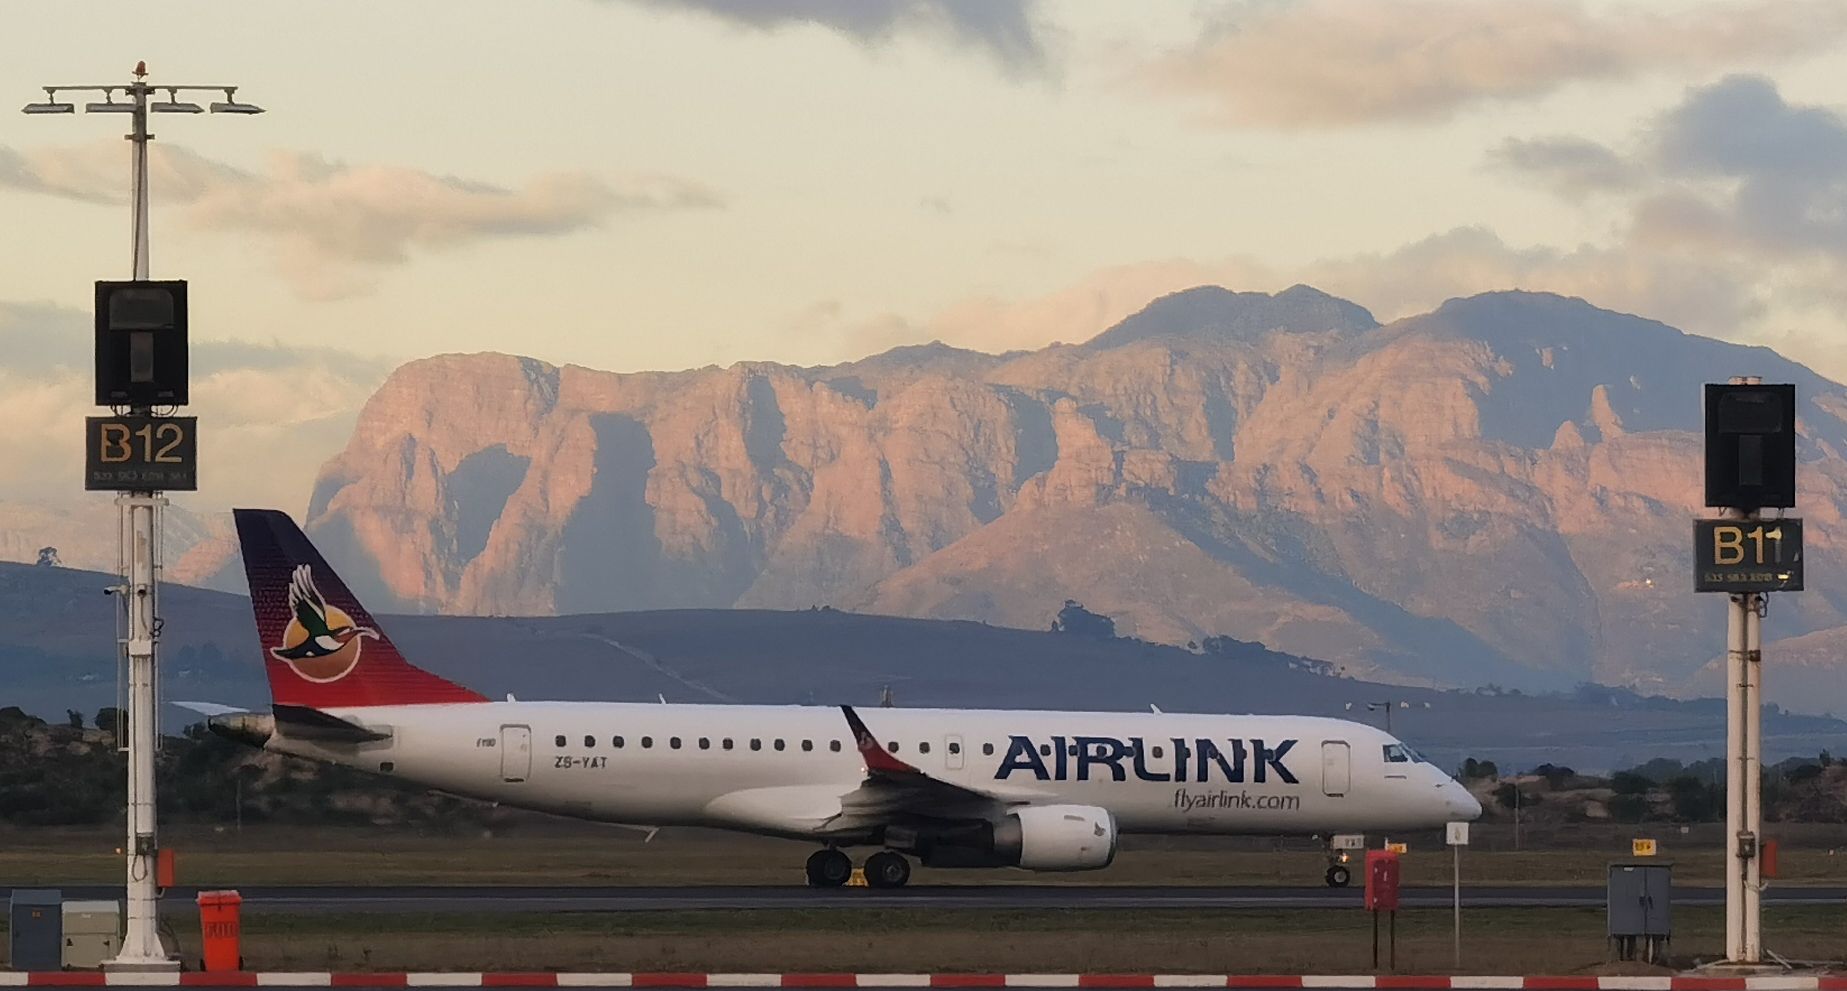 Airlink Embraer E190 at Cape Town